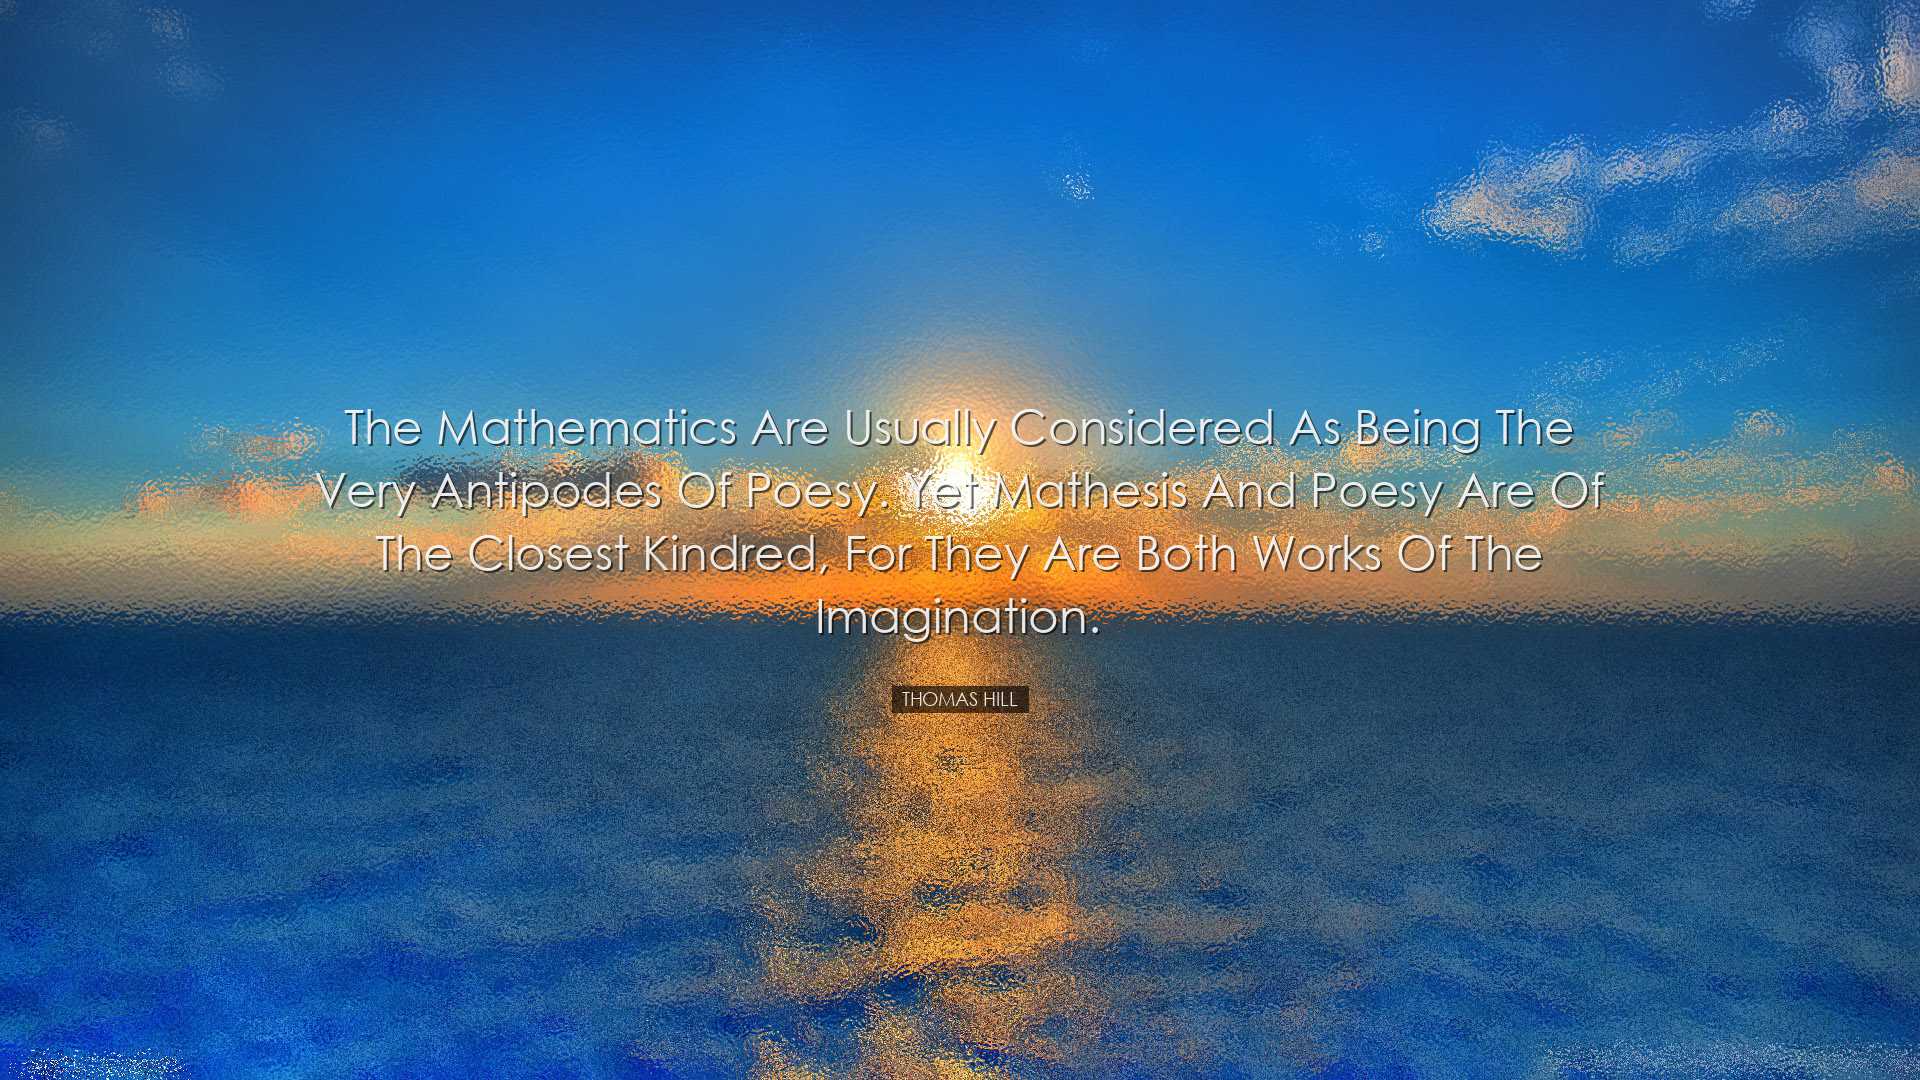 The mathematics are usually considered as being the very antipodes